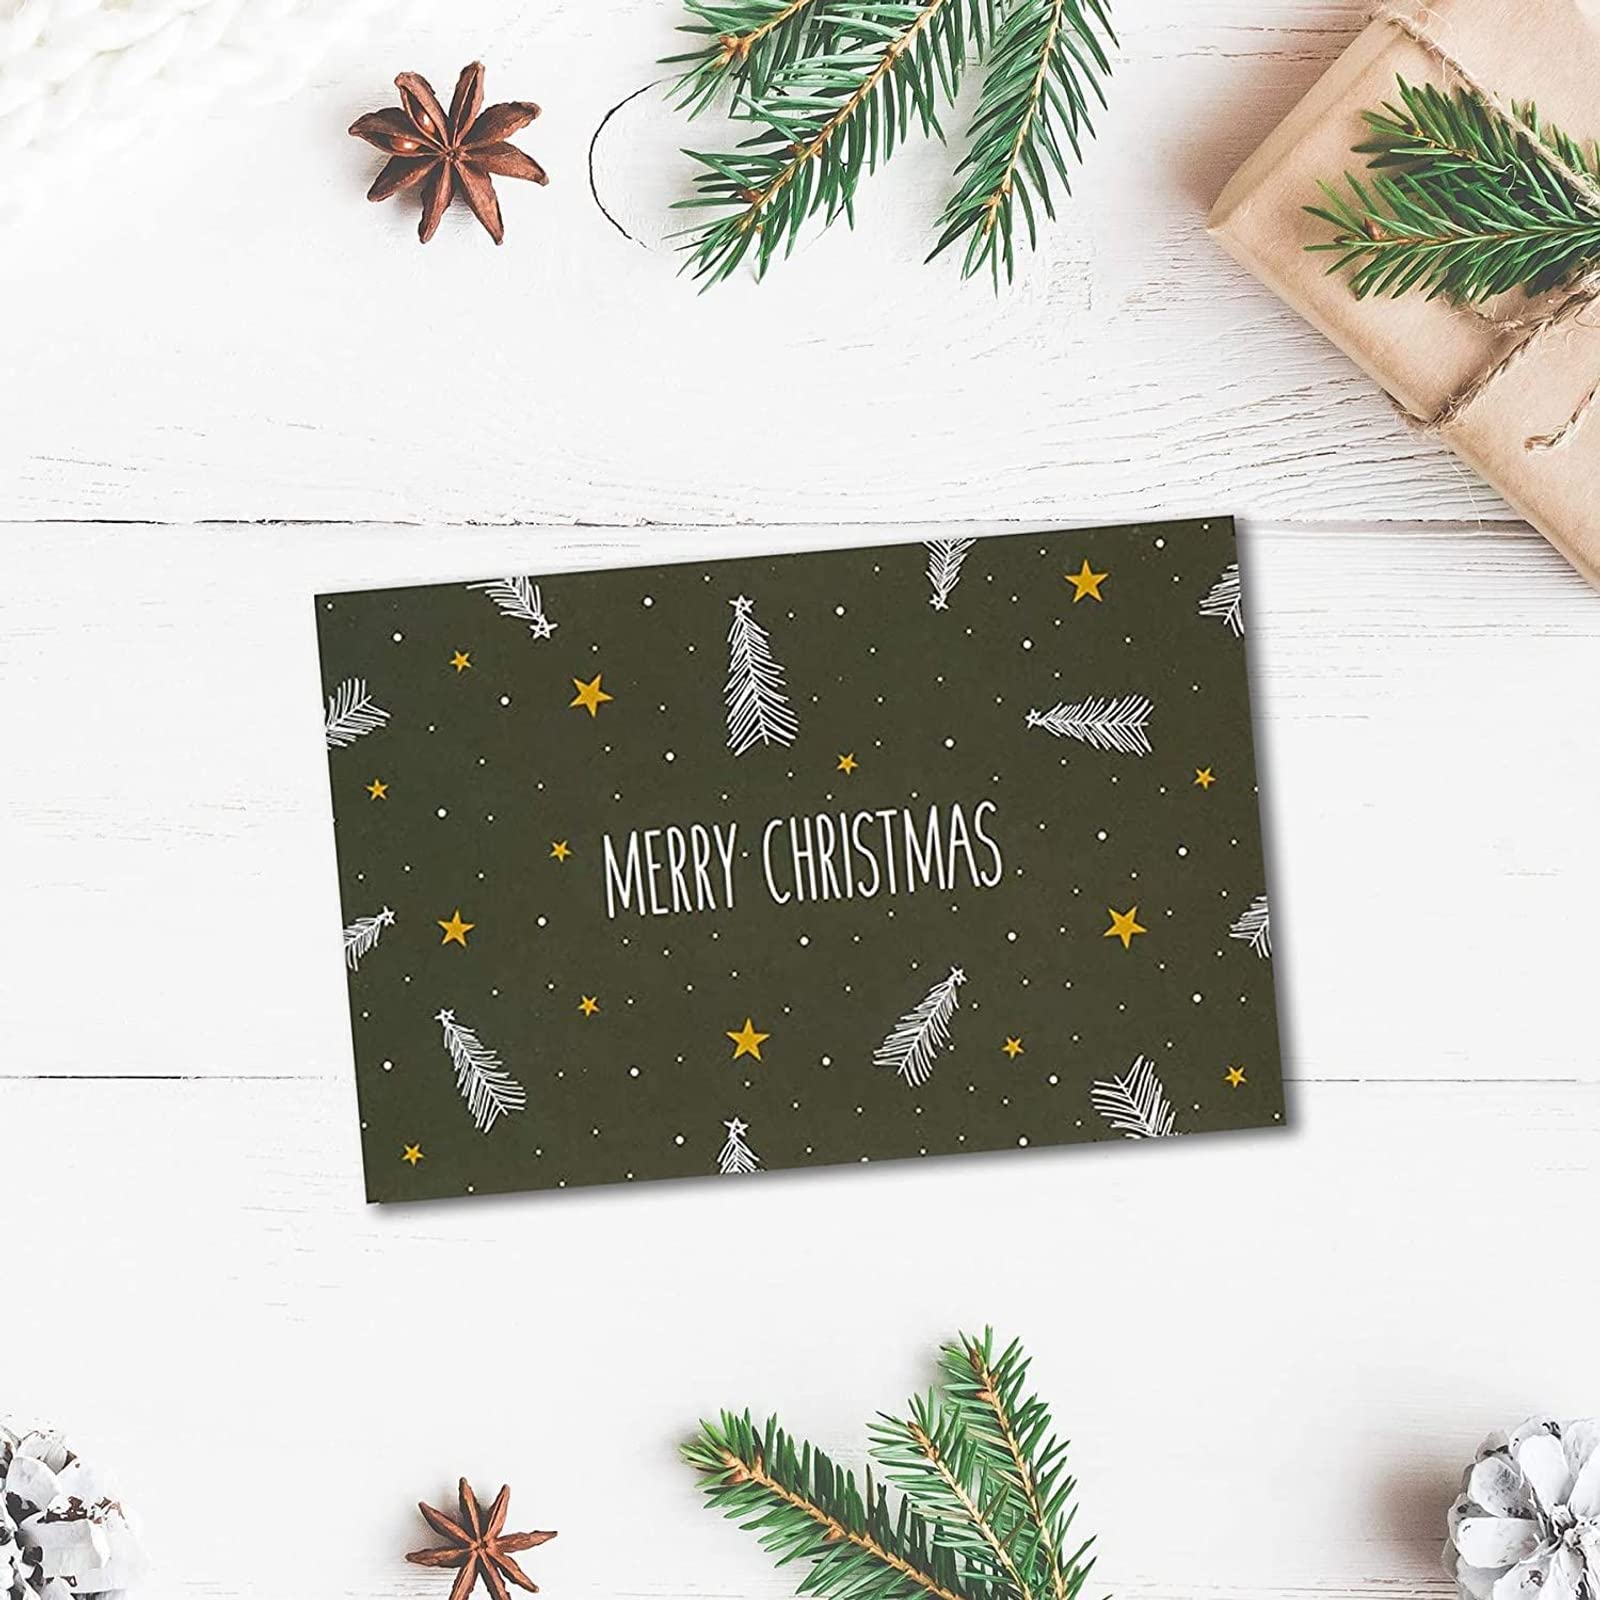 48 Pack of Christmas Winter Holiday Family Greeting Cards Green and Cream Merry Christmas Festive Designs Boxed with 48 Count White Envelopes Included 4.5 x 6.25 Inches